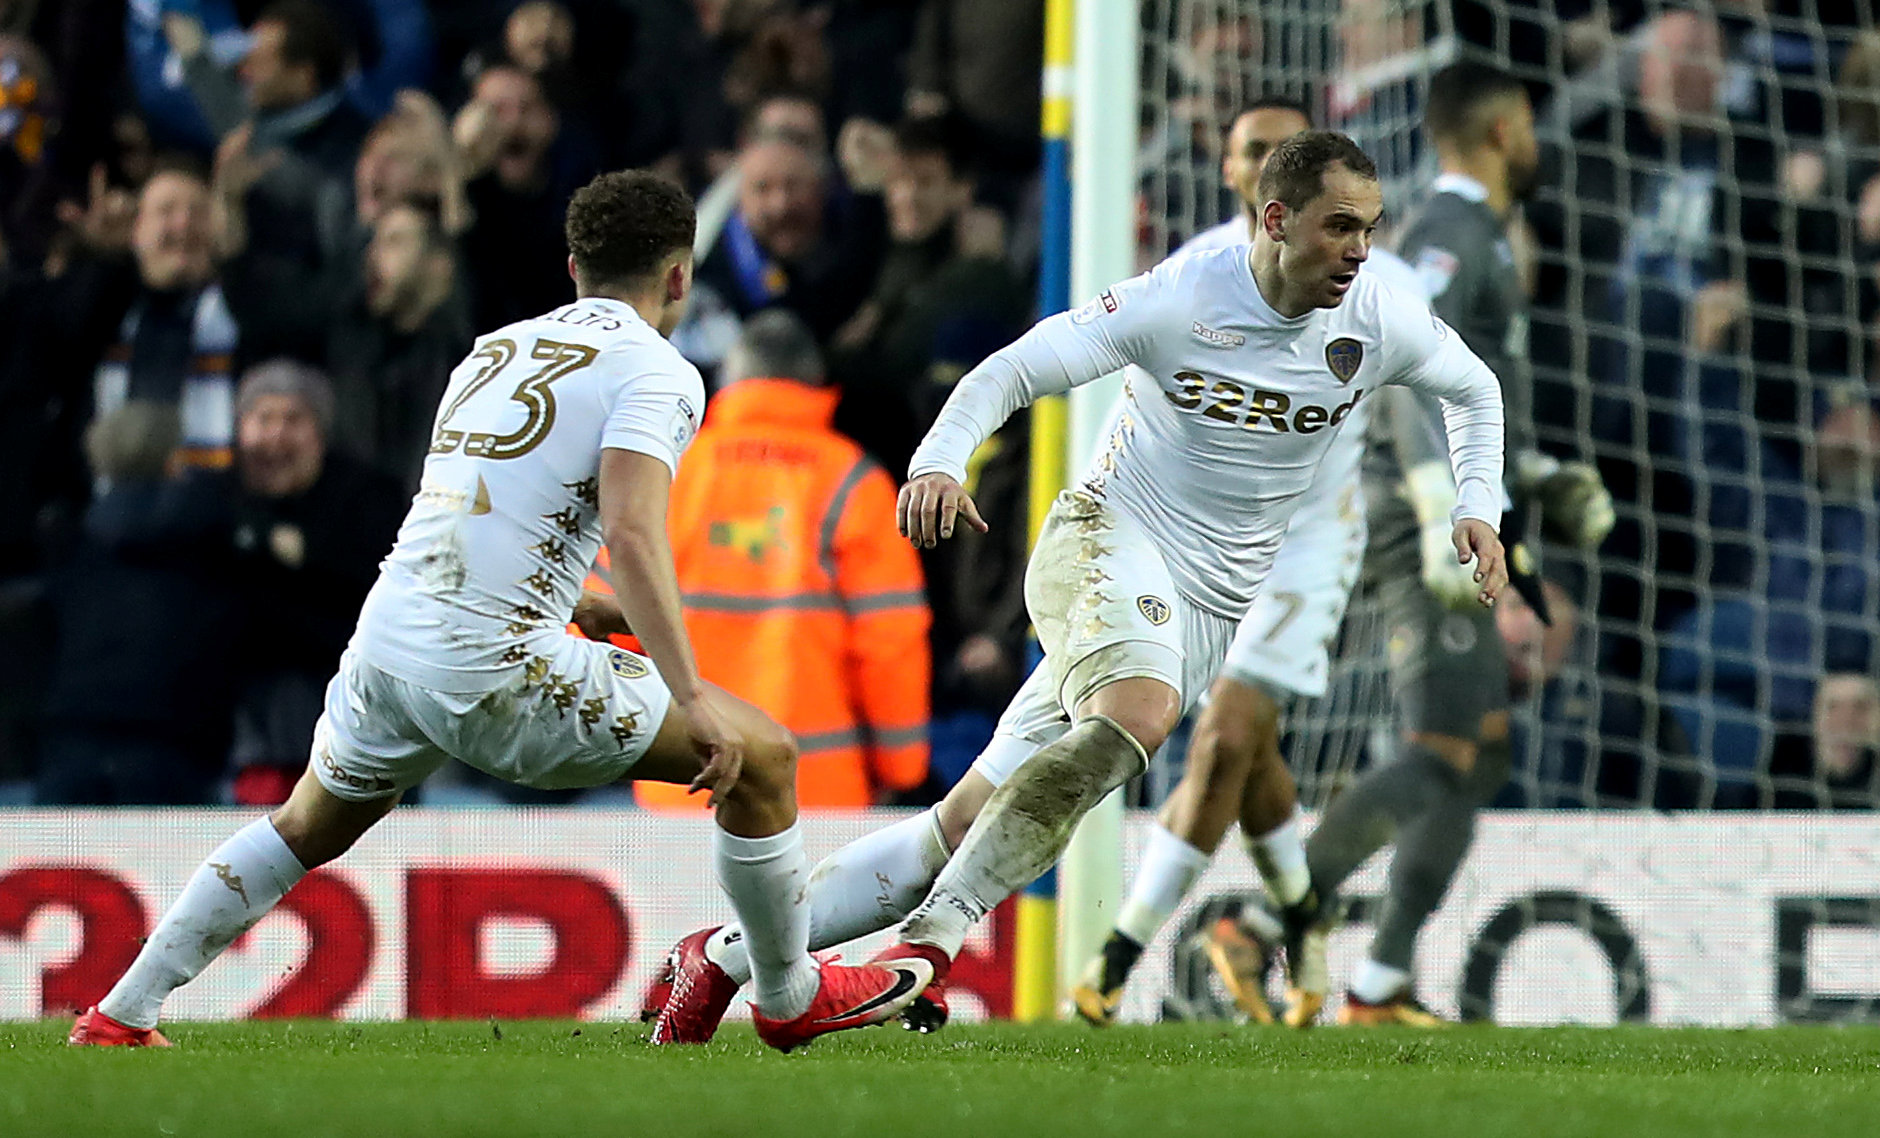 Leeds United: A club crest is more than an image; it's an identity